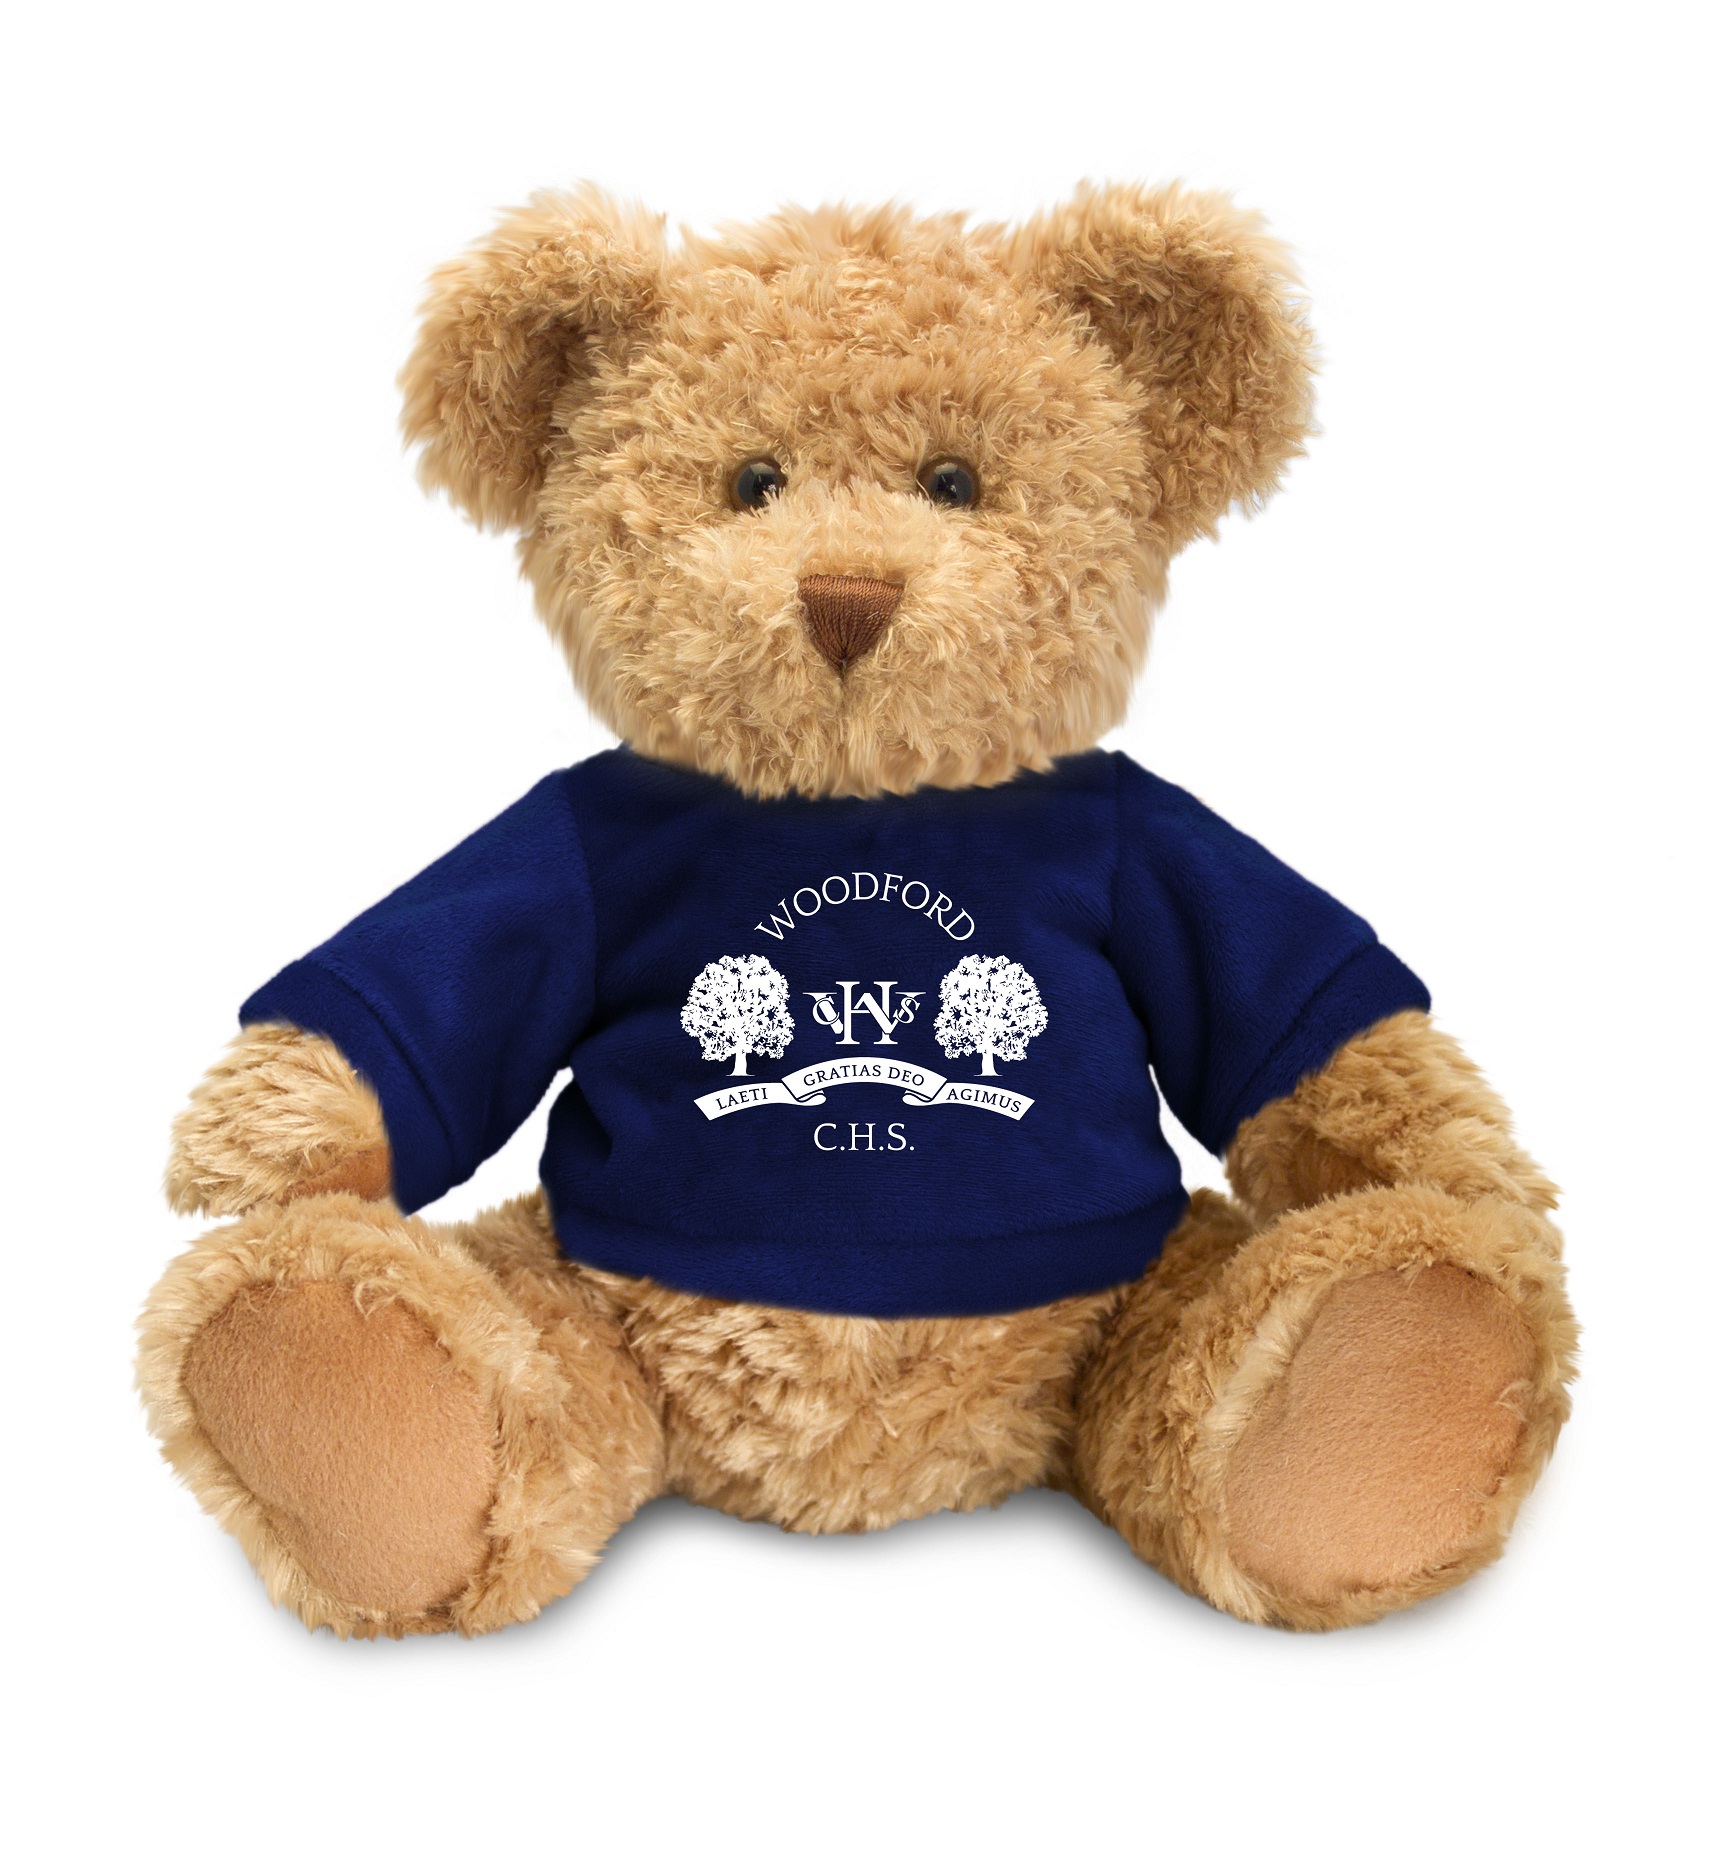 Meet Winston- Our Woodford Bear